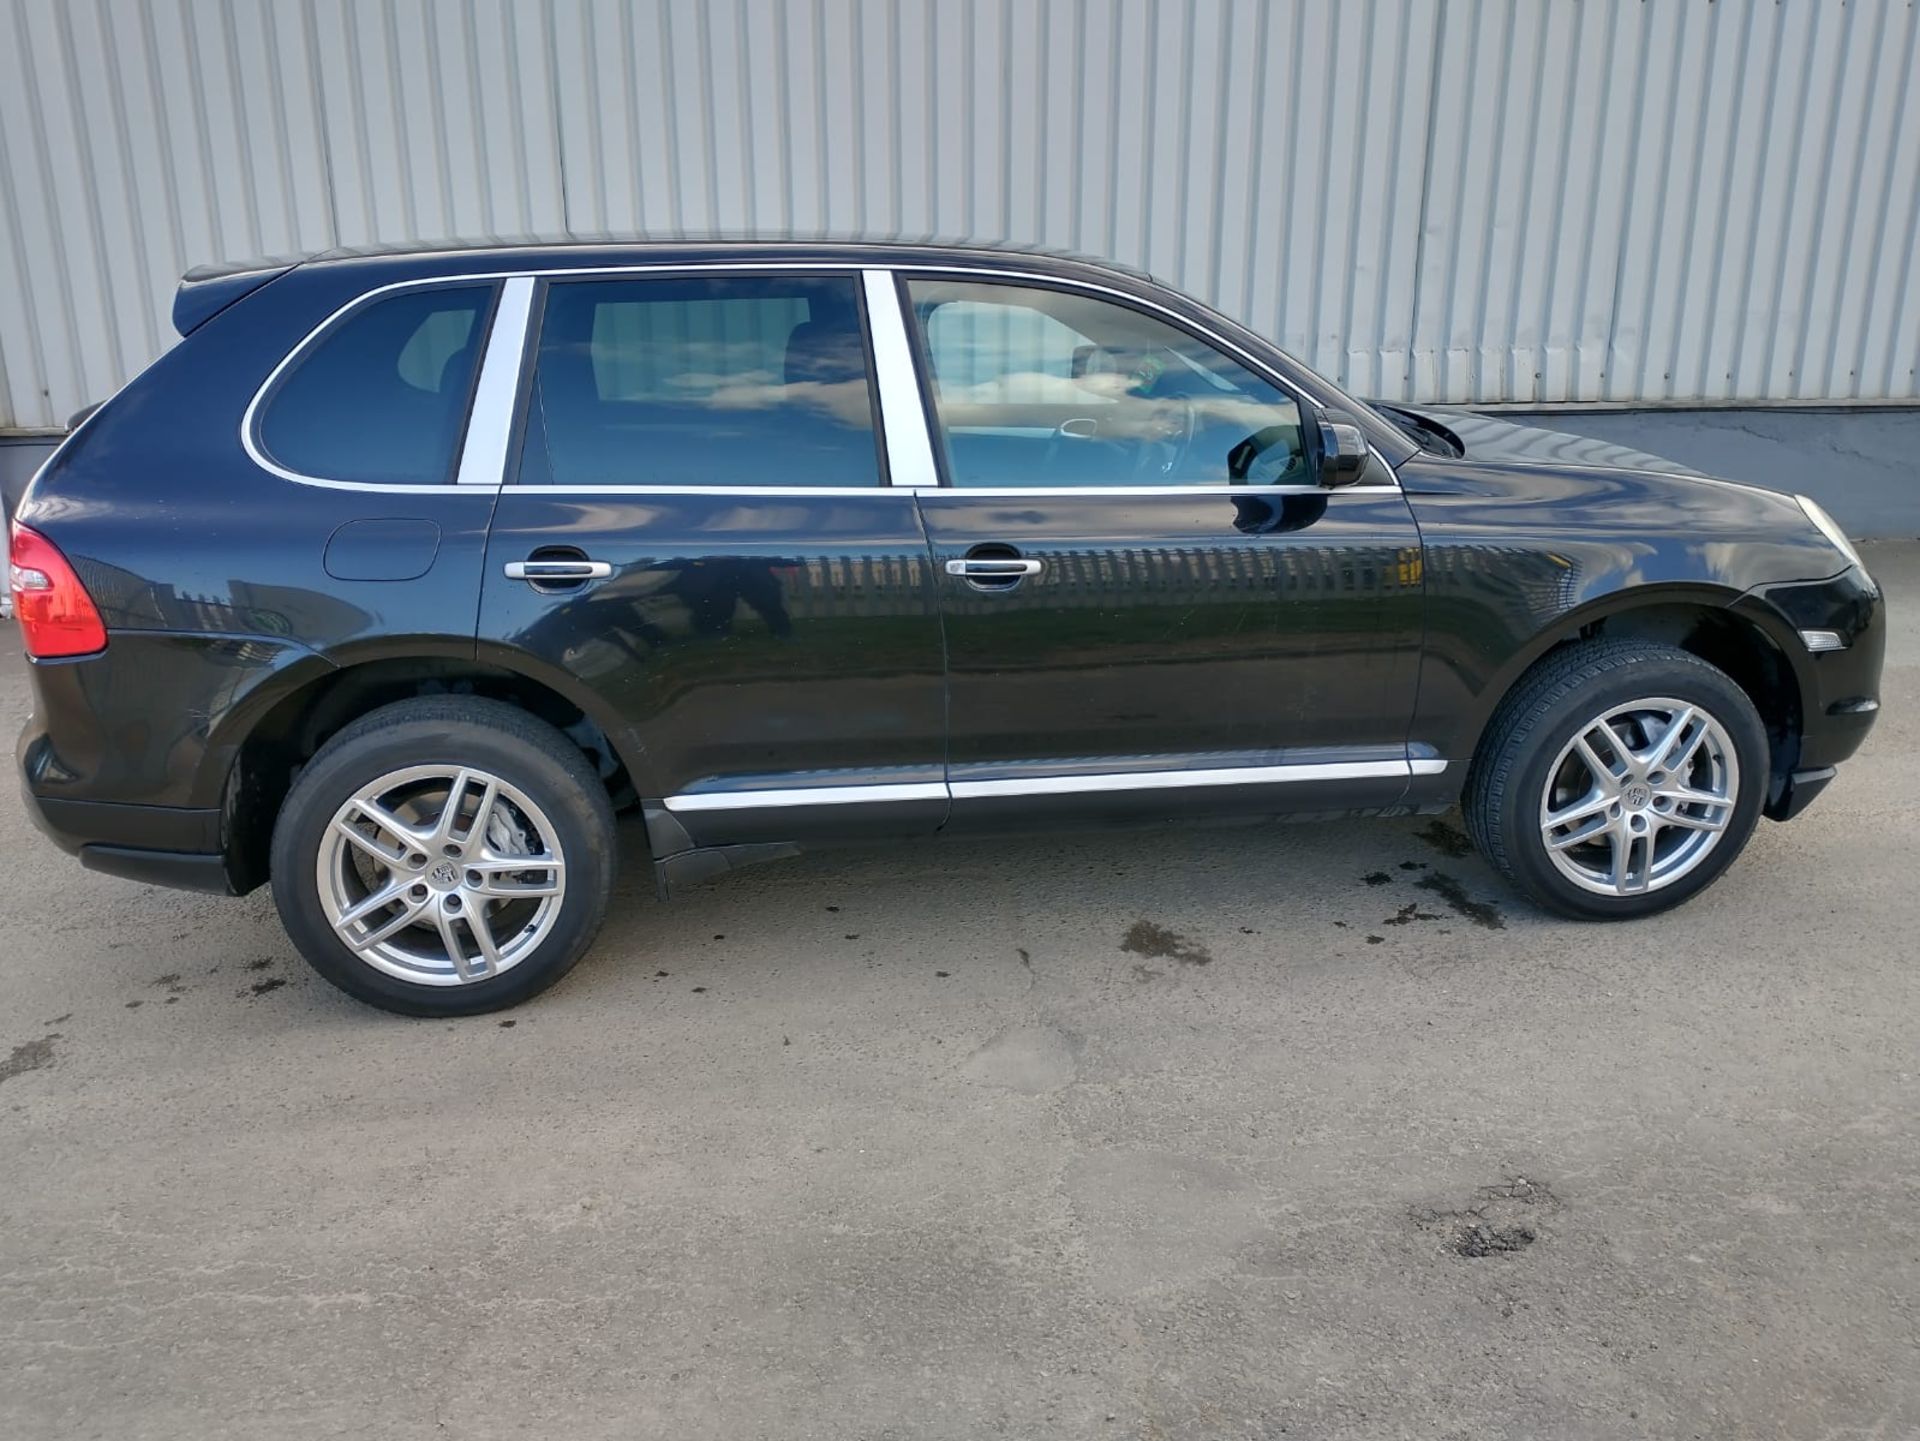 2008 Porsche Cayenne Tiptronic 3.6 5Dr SUV - CL505 - NO VAT ON THE HAMMER - Location: Corby, Northam - Image 15 of 16